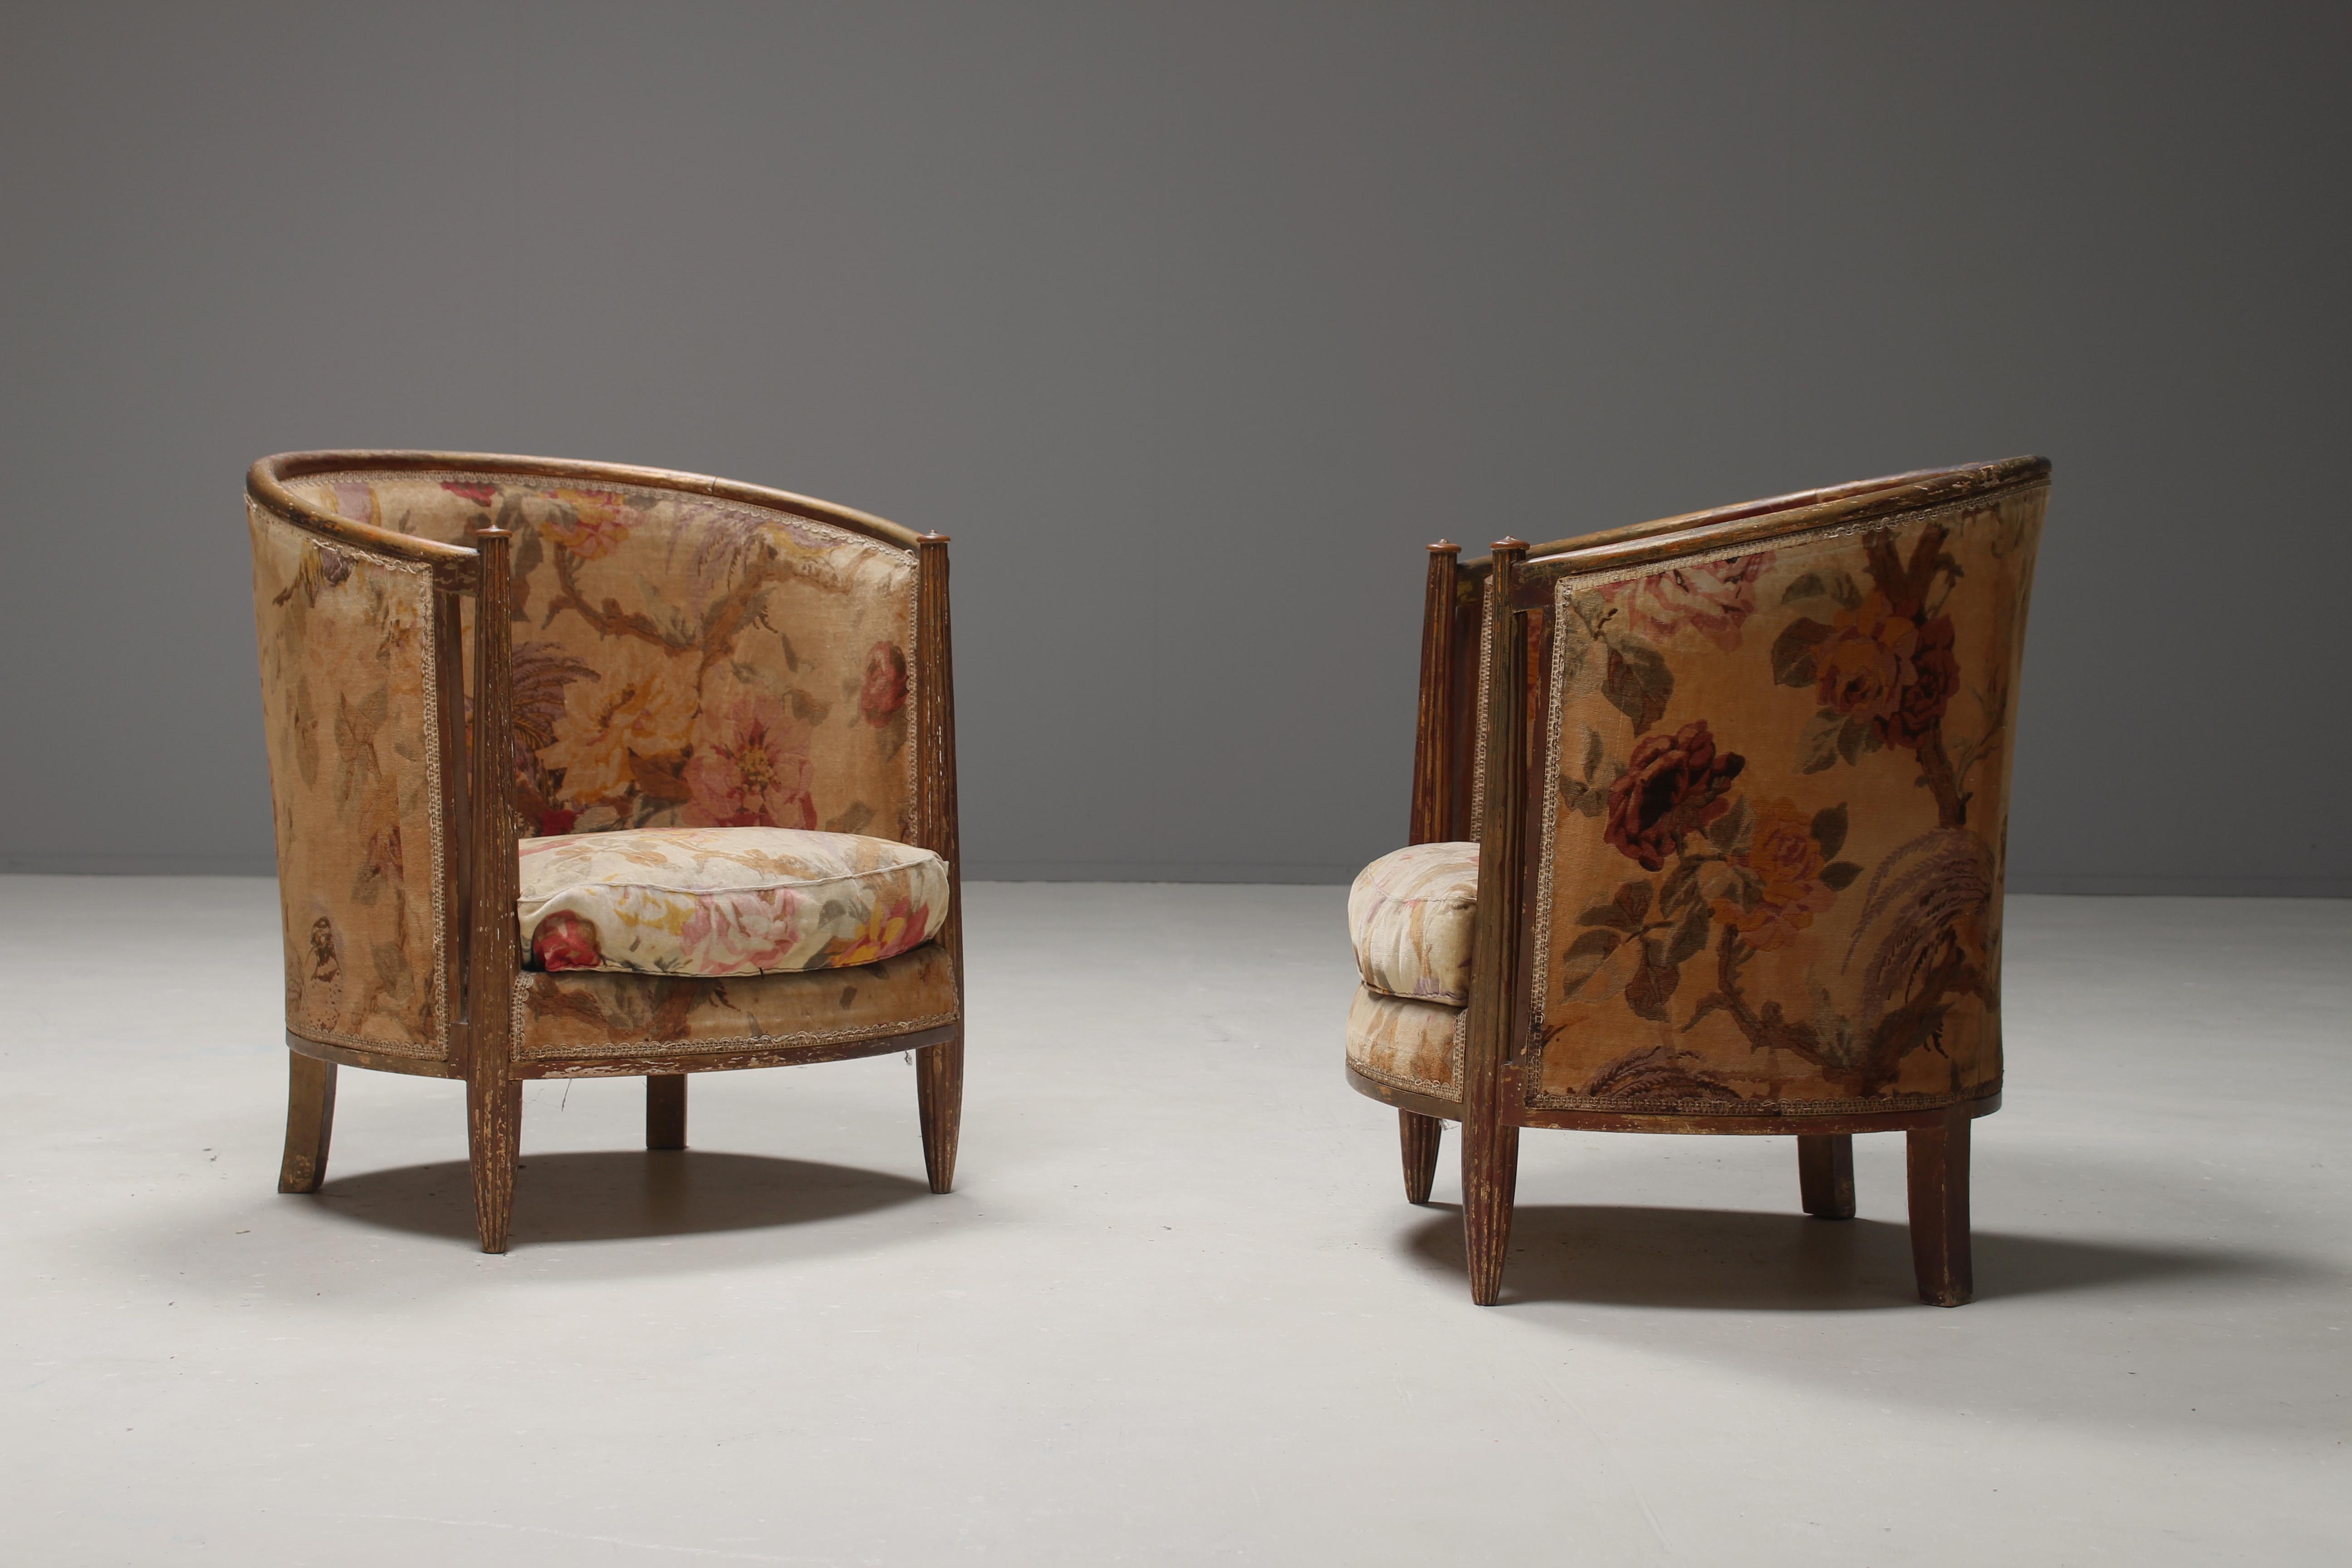 Important Early and Rare Gilded Paul Follot Art Nouveau Club Chairs, 1911 For Sale 4